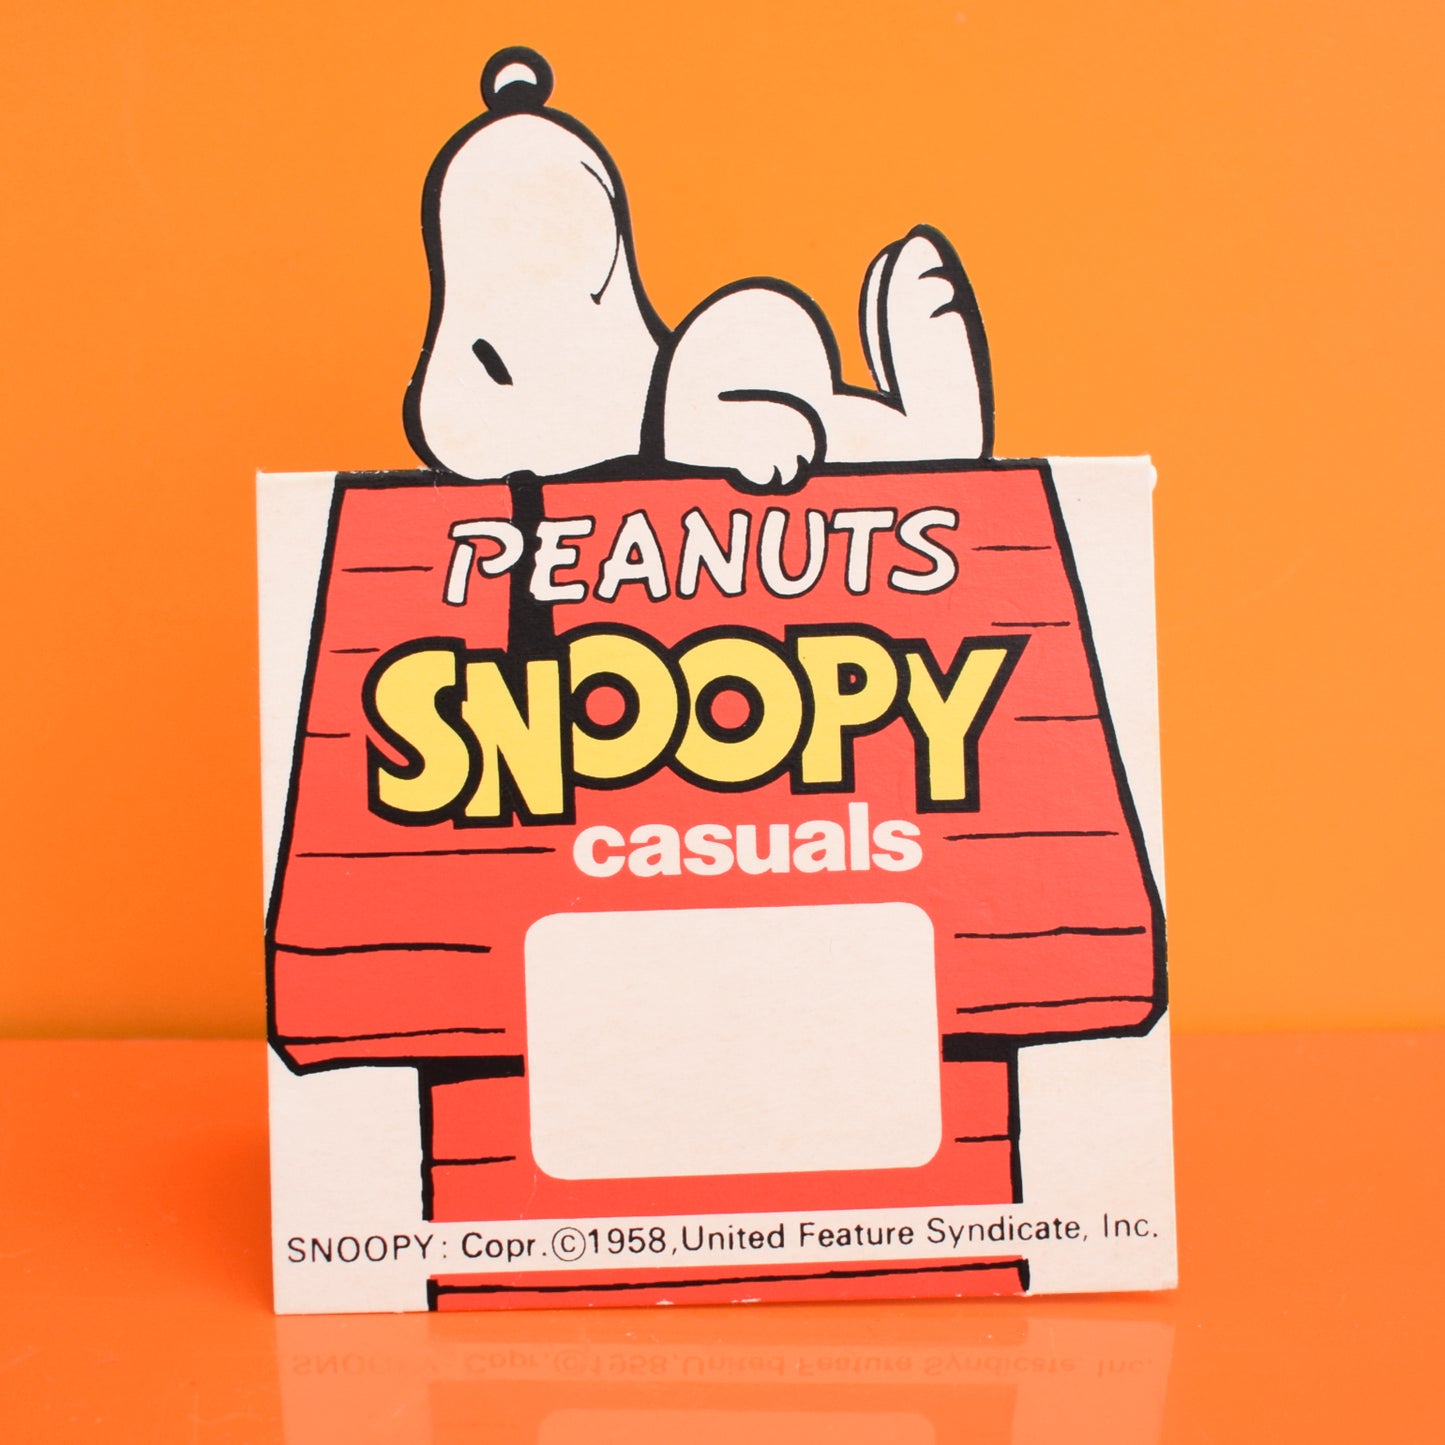 Vintage 1960s Peanuts Snoopy Casuals Paper Advertising